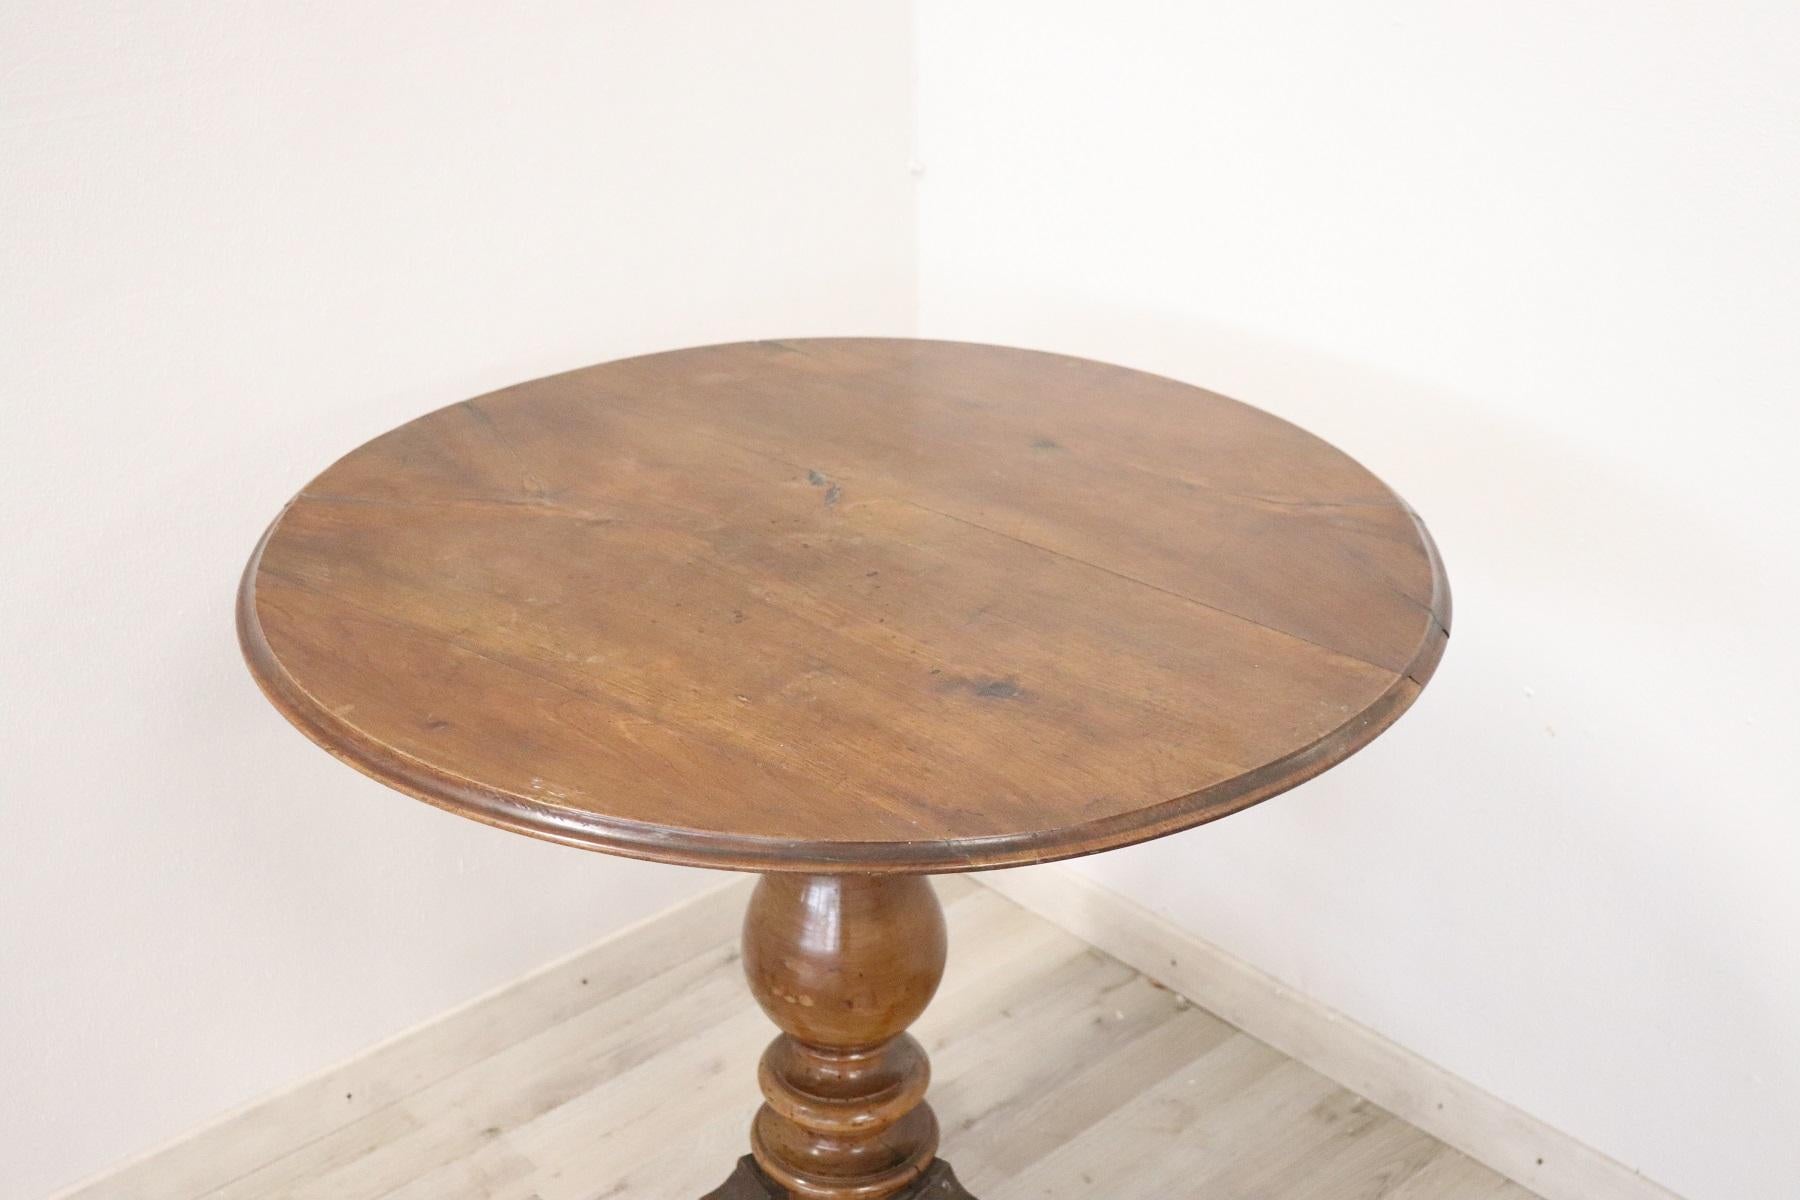 Beautiful important antique round centre table 1850 in walnut. Table with elegant turned central leg. Idea table to embellish the centre of a room.